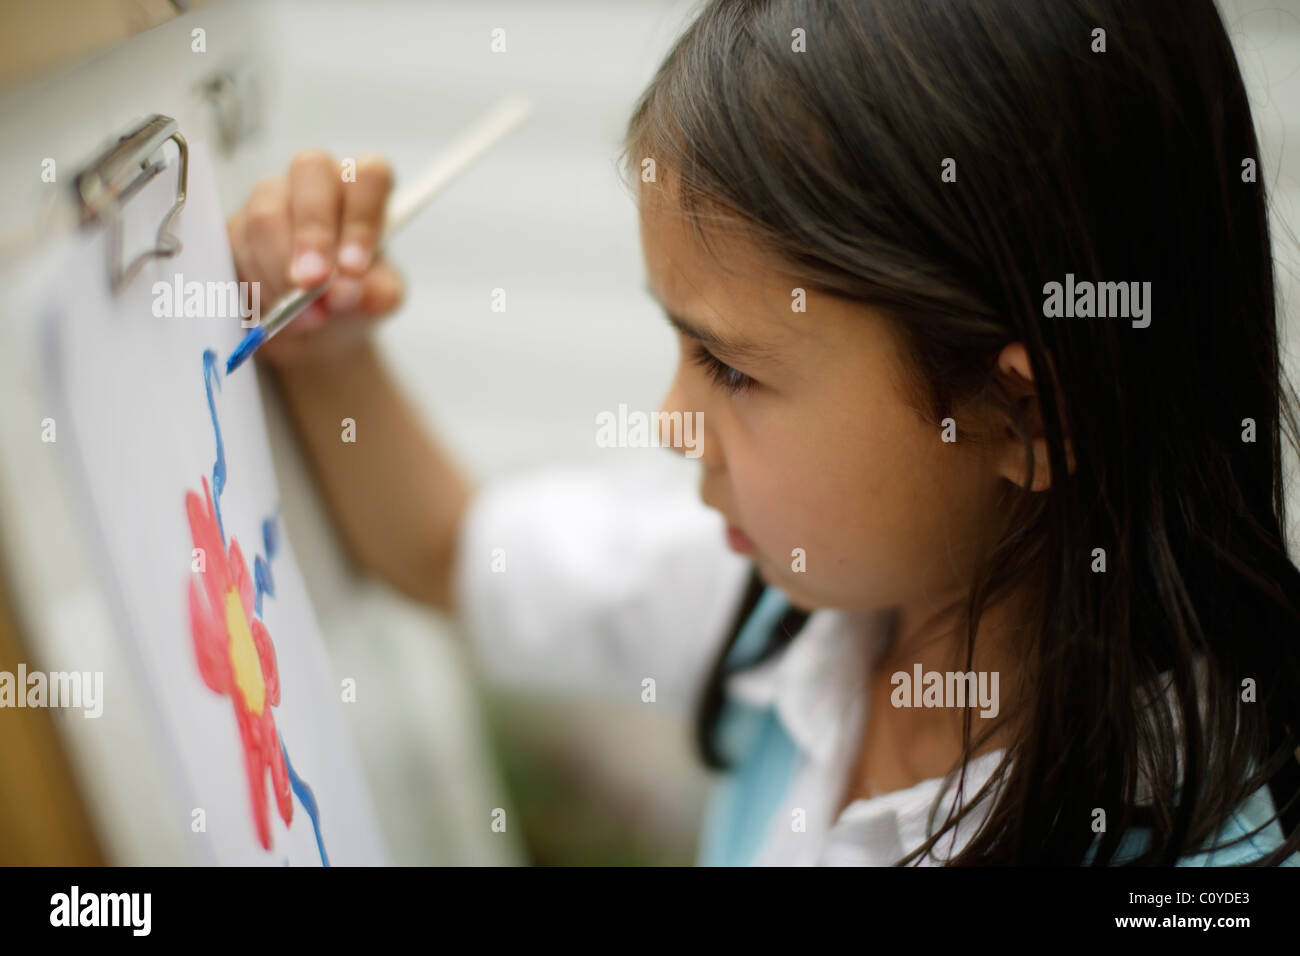 Girl painting on easel. Stock Photo